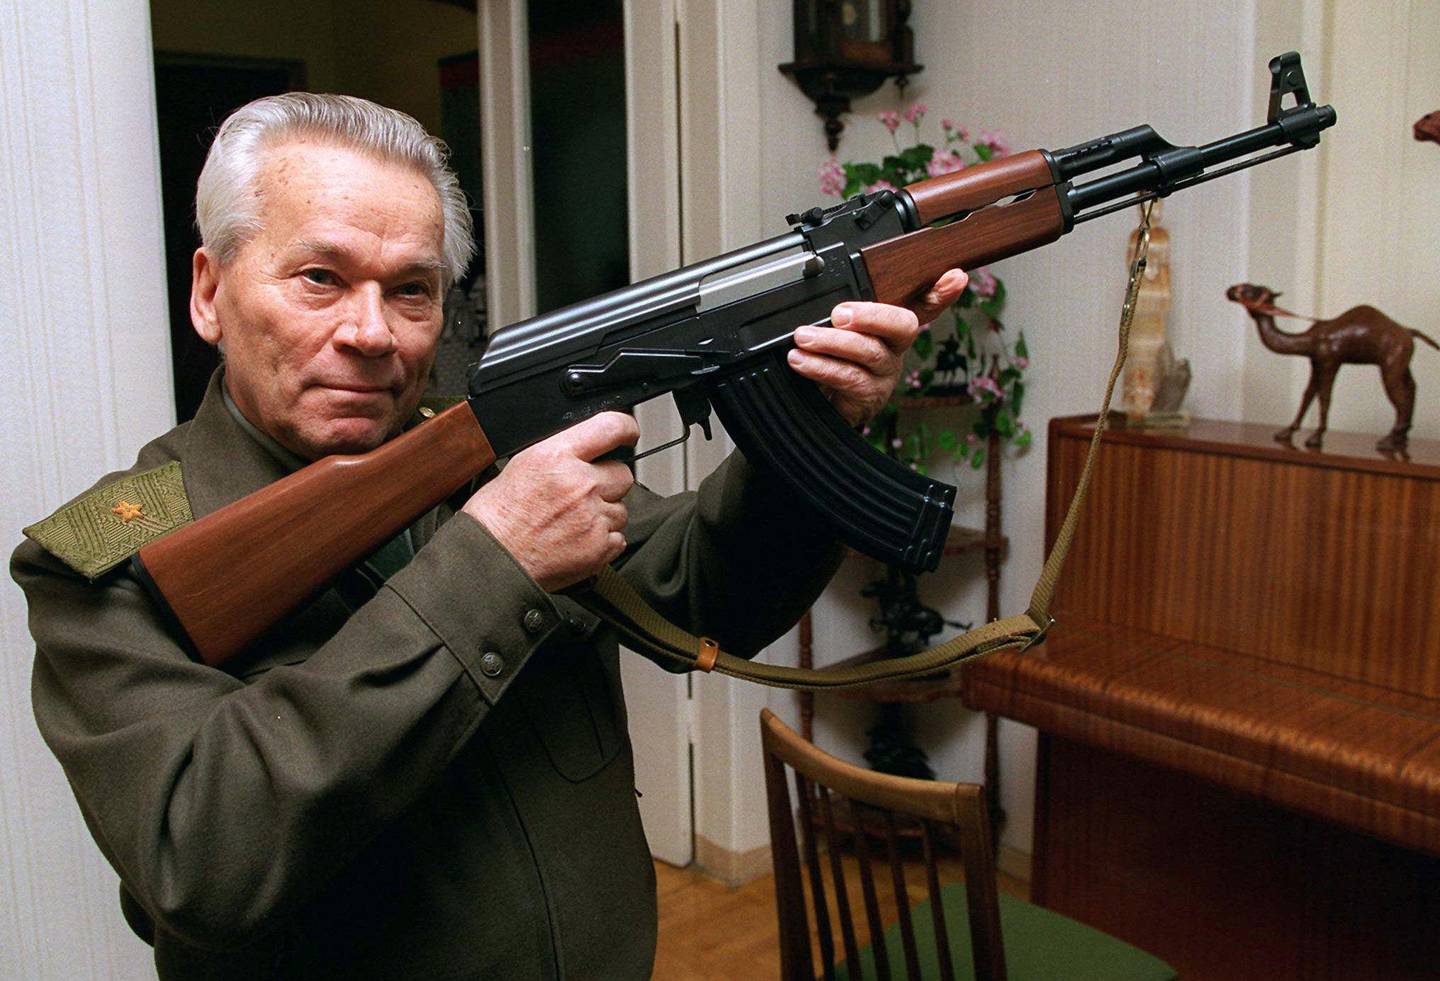 FILE - In this Wednesday, Oct. 29, 1997 file photo Mikhail Kalashnikov shows a model of his world-famous AK-47 assault rifle at home in the Ural Mountain city of Izhevsk, 1000 km (625 miles) east of Moscow. The designer of the world?s most prolific firearm, the AK-47 assault rifle, has written a sorrowful letter to the Russian Orthodox Church?s head, asking if he?s to blame for the deaths of those killed by his creation. According to a Monday, Jan. 13, 2014 report in the daily Izvestia, several months before his death last month at age 94, Kalashnikov wrote to Patriarch Kirill that he keeps asking himself if he?s responsible for those deaths. (AP Photo/Vladimir Vyatkin, File)